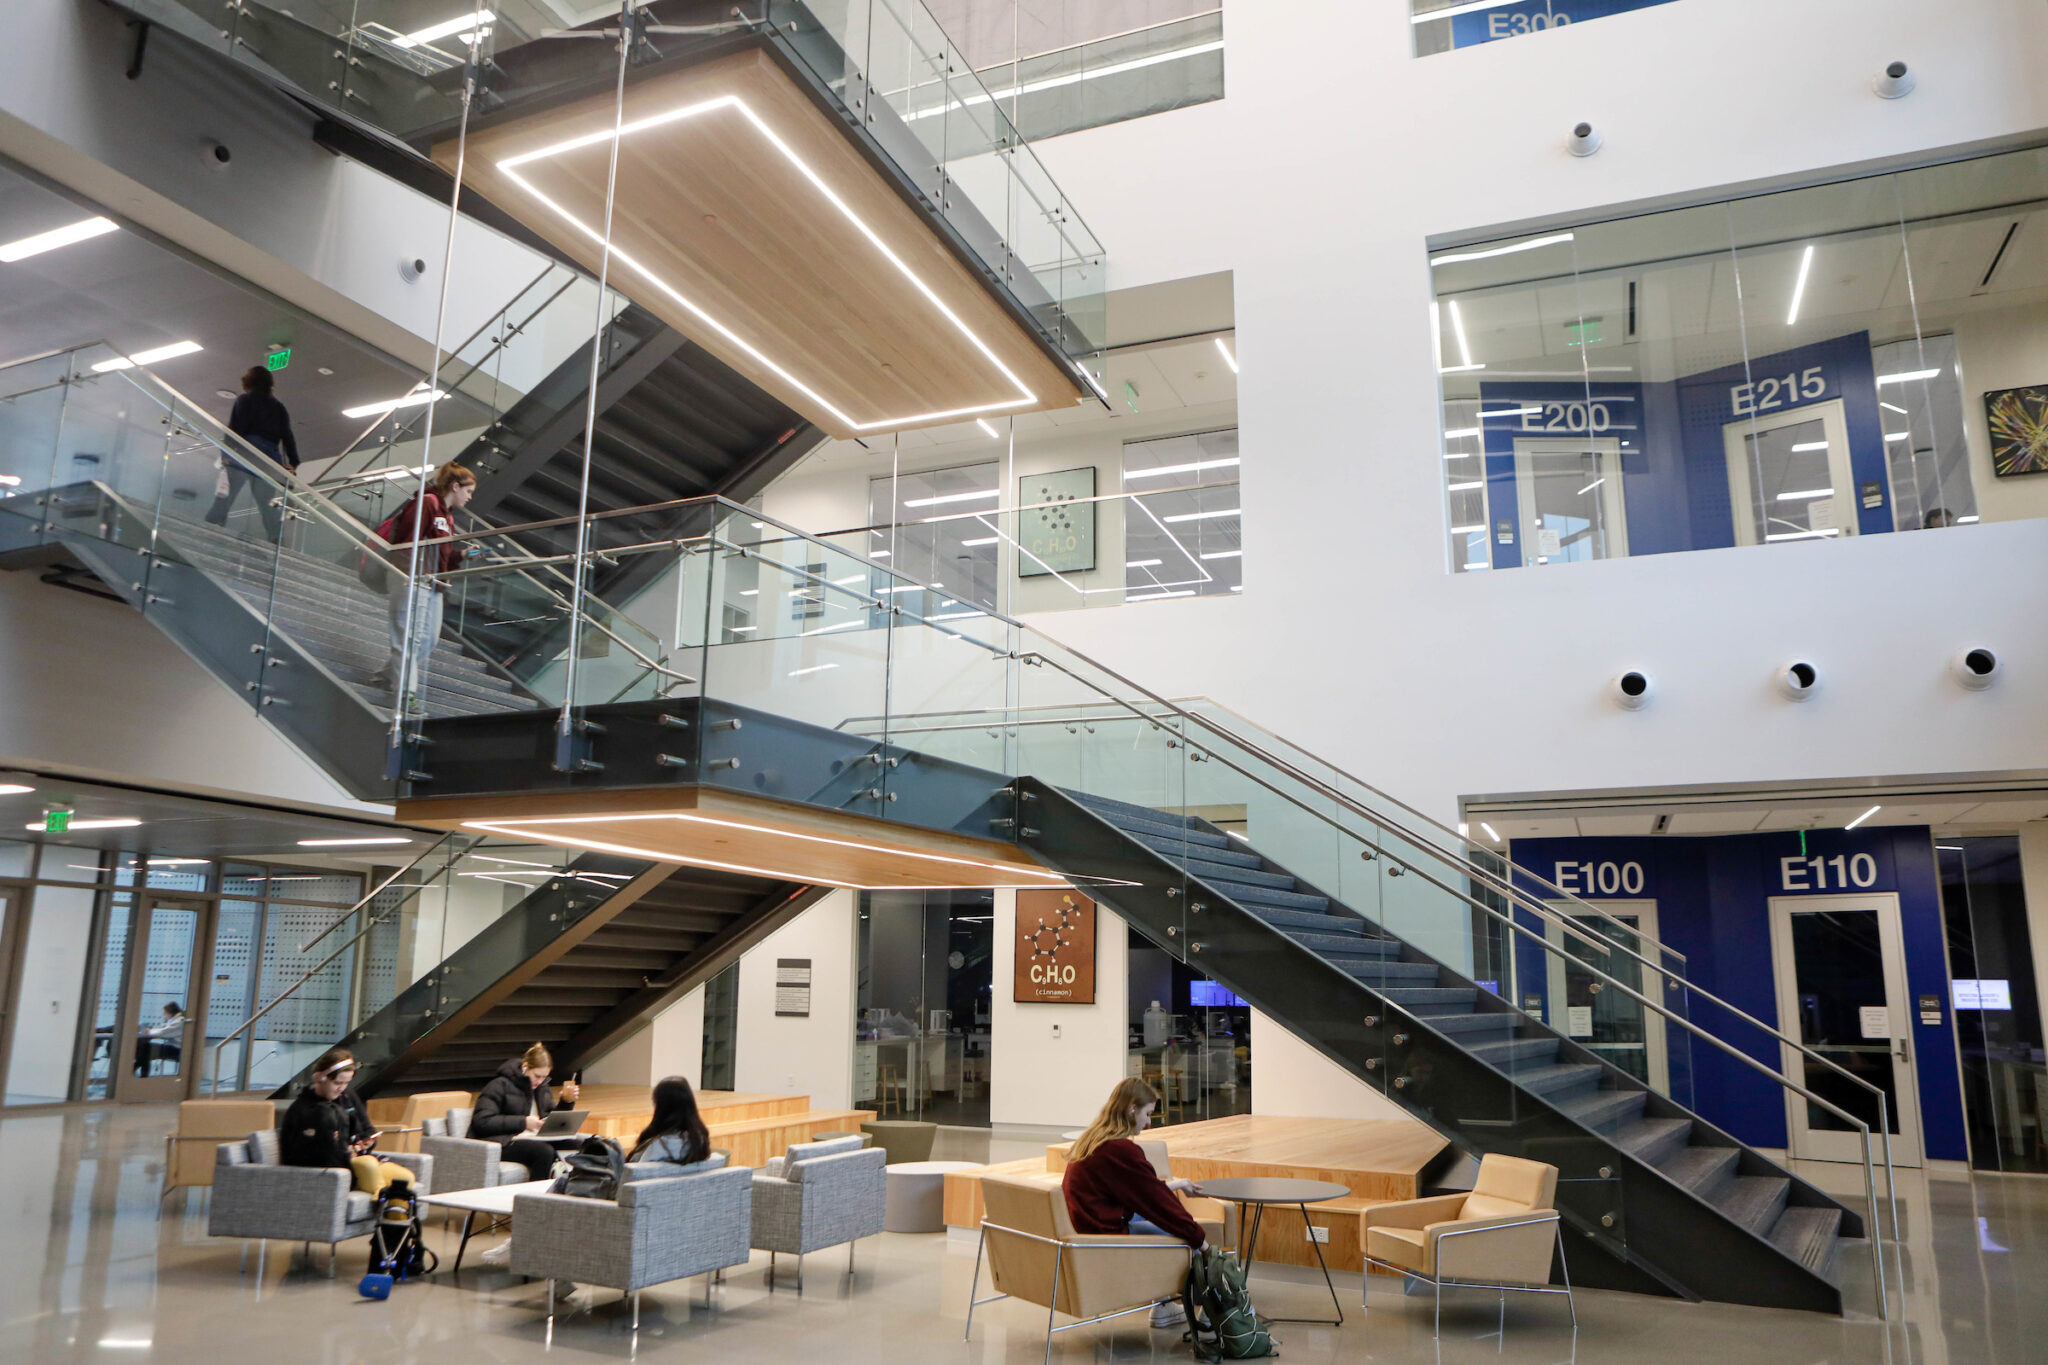 Interior view of the Instructional Laboratory and Innovative Learning Building at Texas A&amp;M University featuring students seated in the foyer, a two-way staircase, and partial views of the building’s first two floors